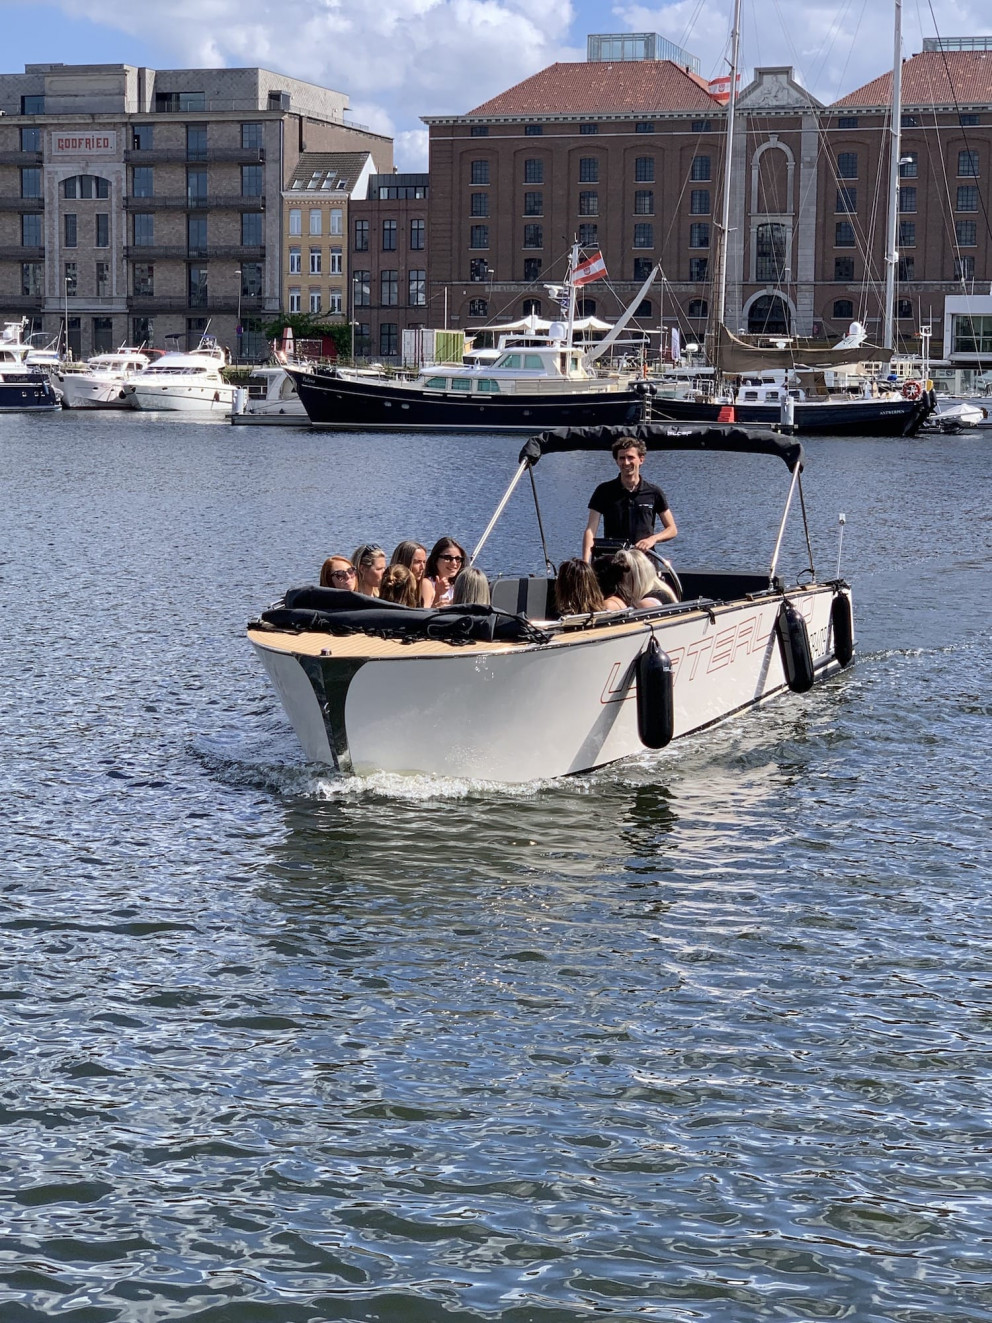 Waterlimo conducting a boat tour with their sloop in the city harbor of Antwerp near the MAS